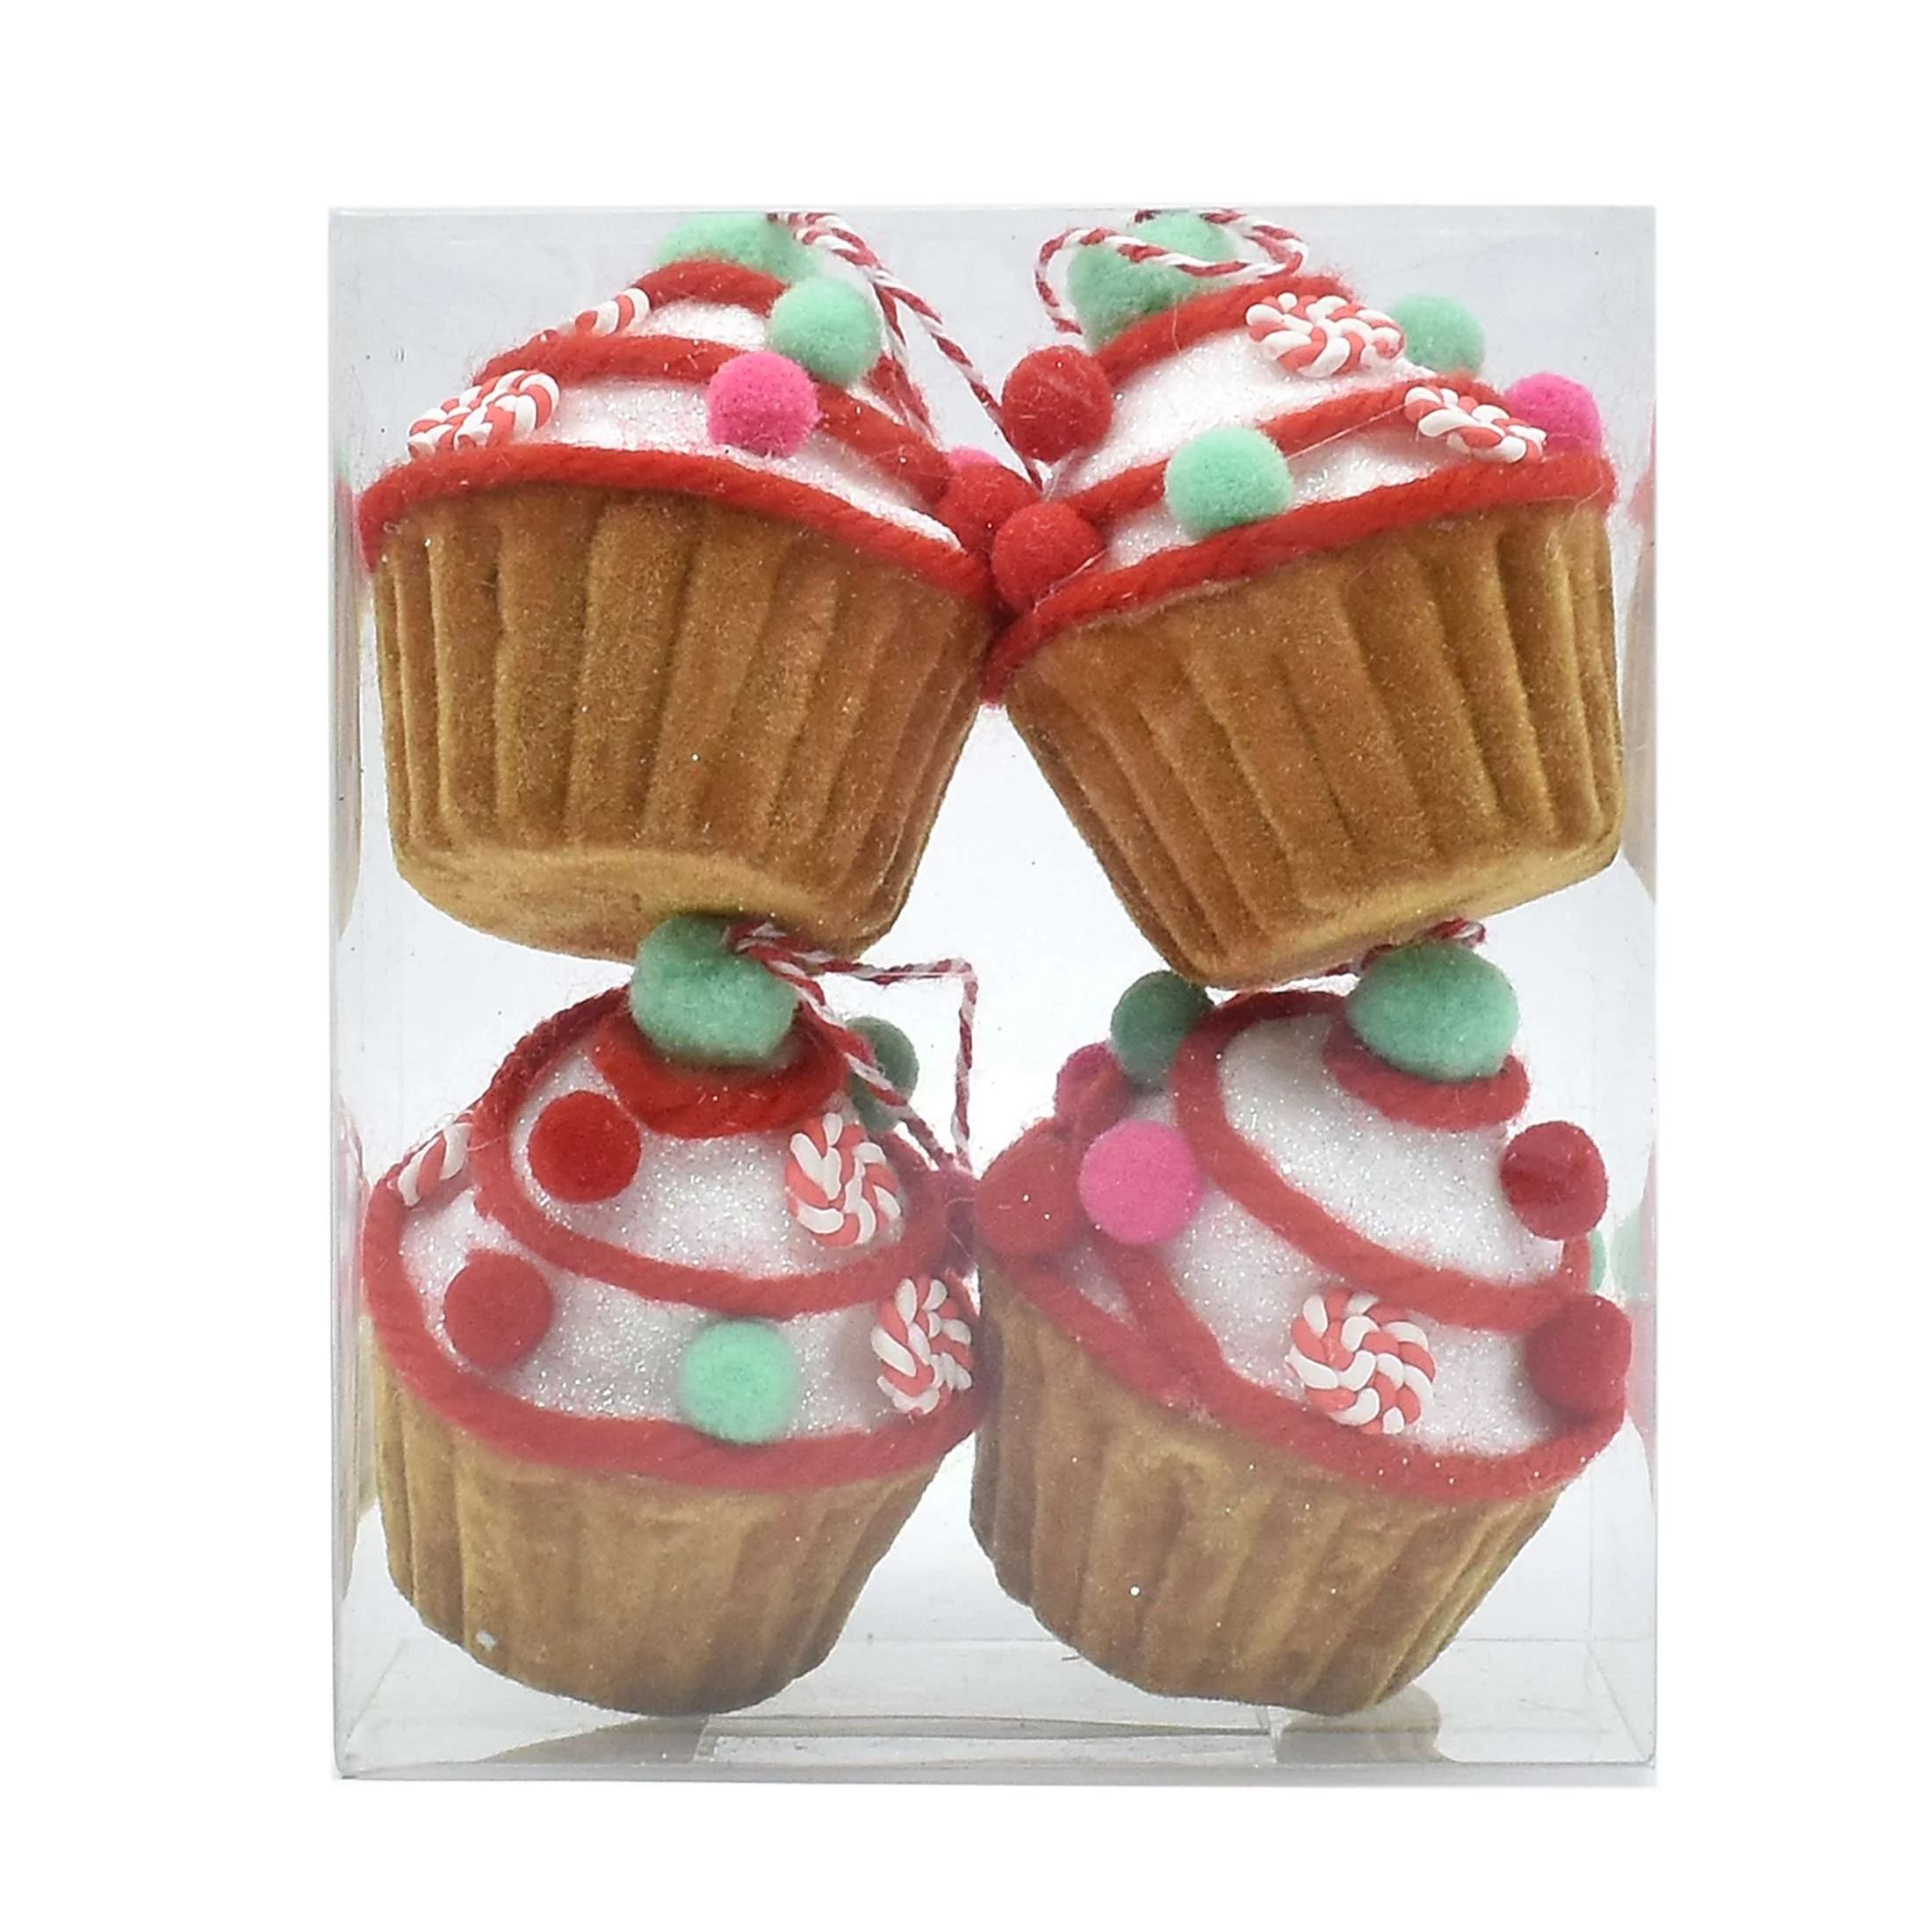 4-Count Brown Cupcake with Pompom and Candy Christmas Decorative Ornament Set, 0.07lb, by Holiday... | Walmart (US)